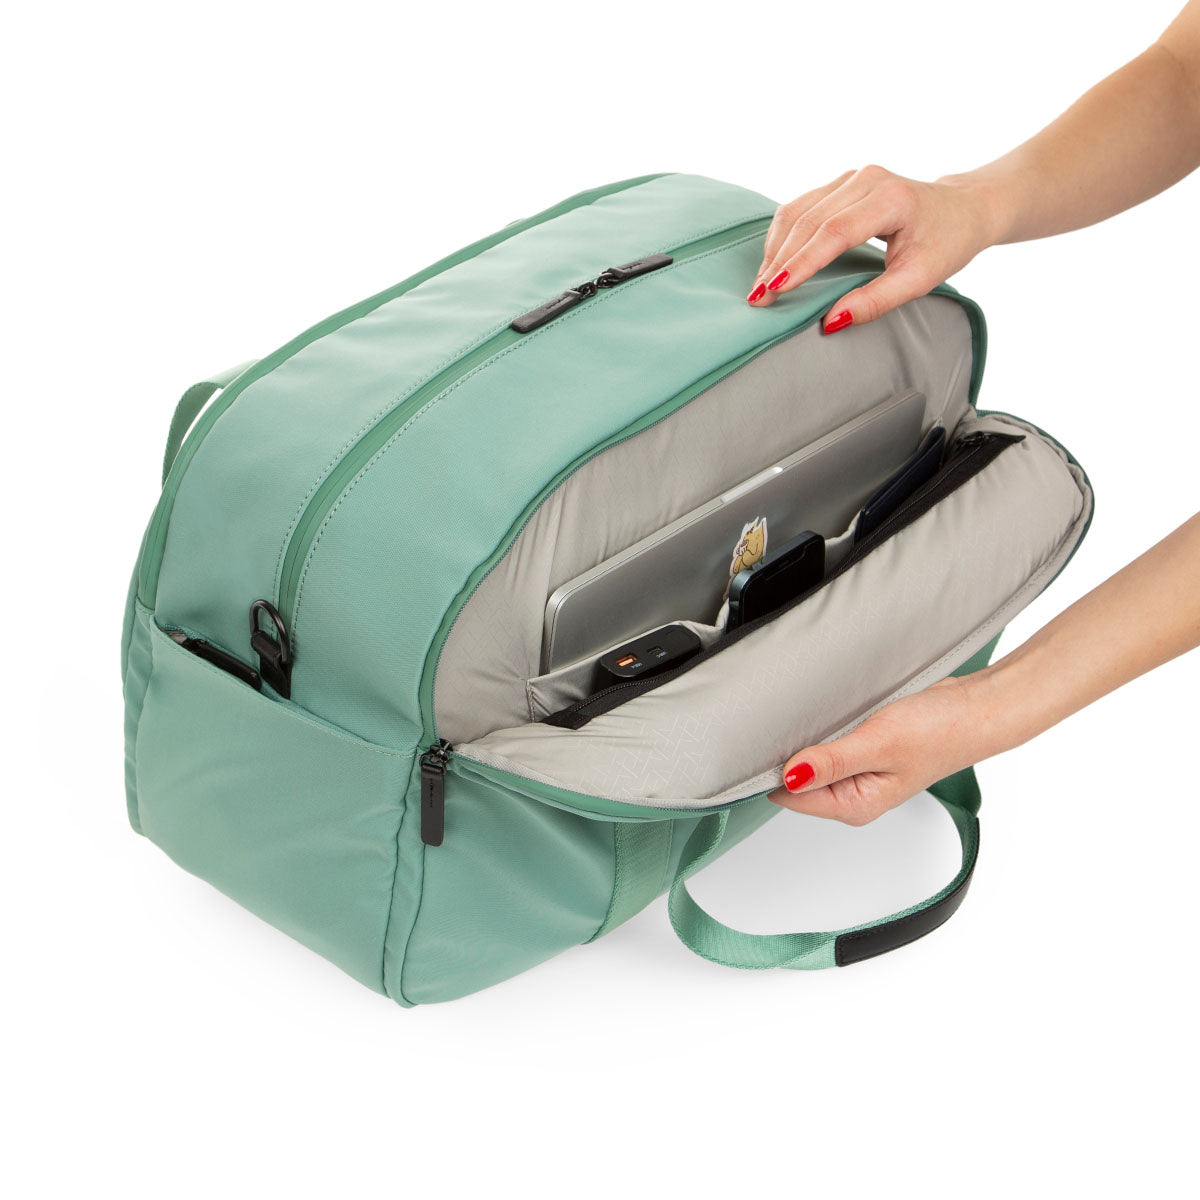 side view of mint weekender with side pocket open showing laptop sleeve inside and three slip pockets for passport type items.